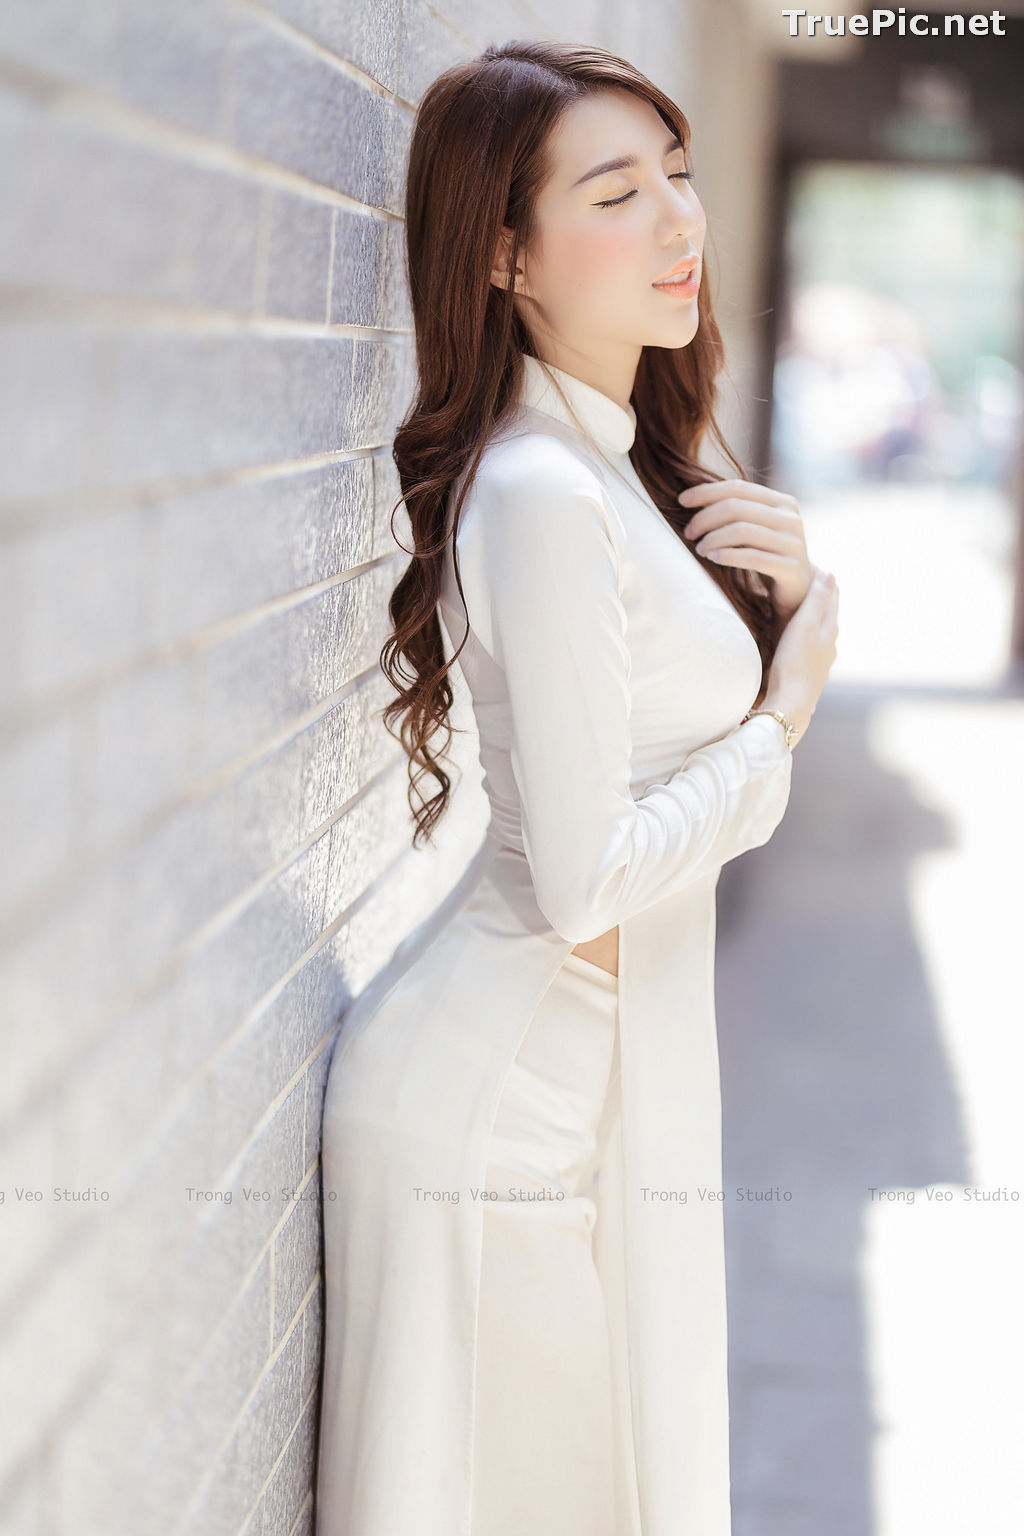 Image The Beauty of Vietnamese Girls with Traditional Dress (Ao Dai) #3 - TruePic.net - Picture-76